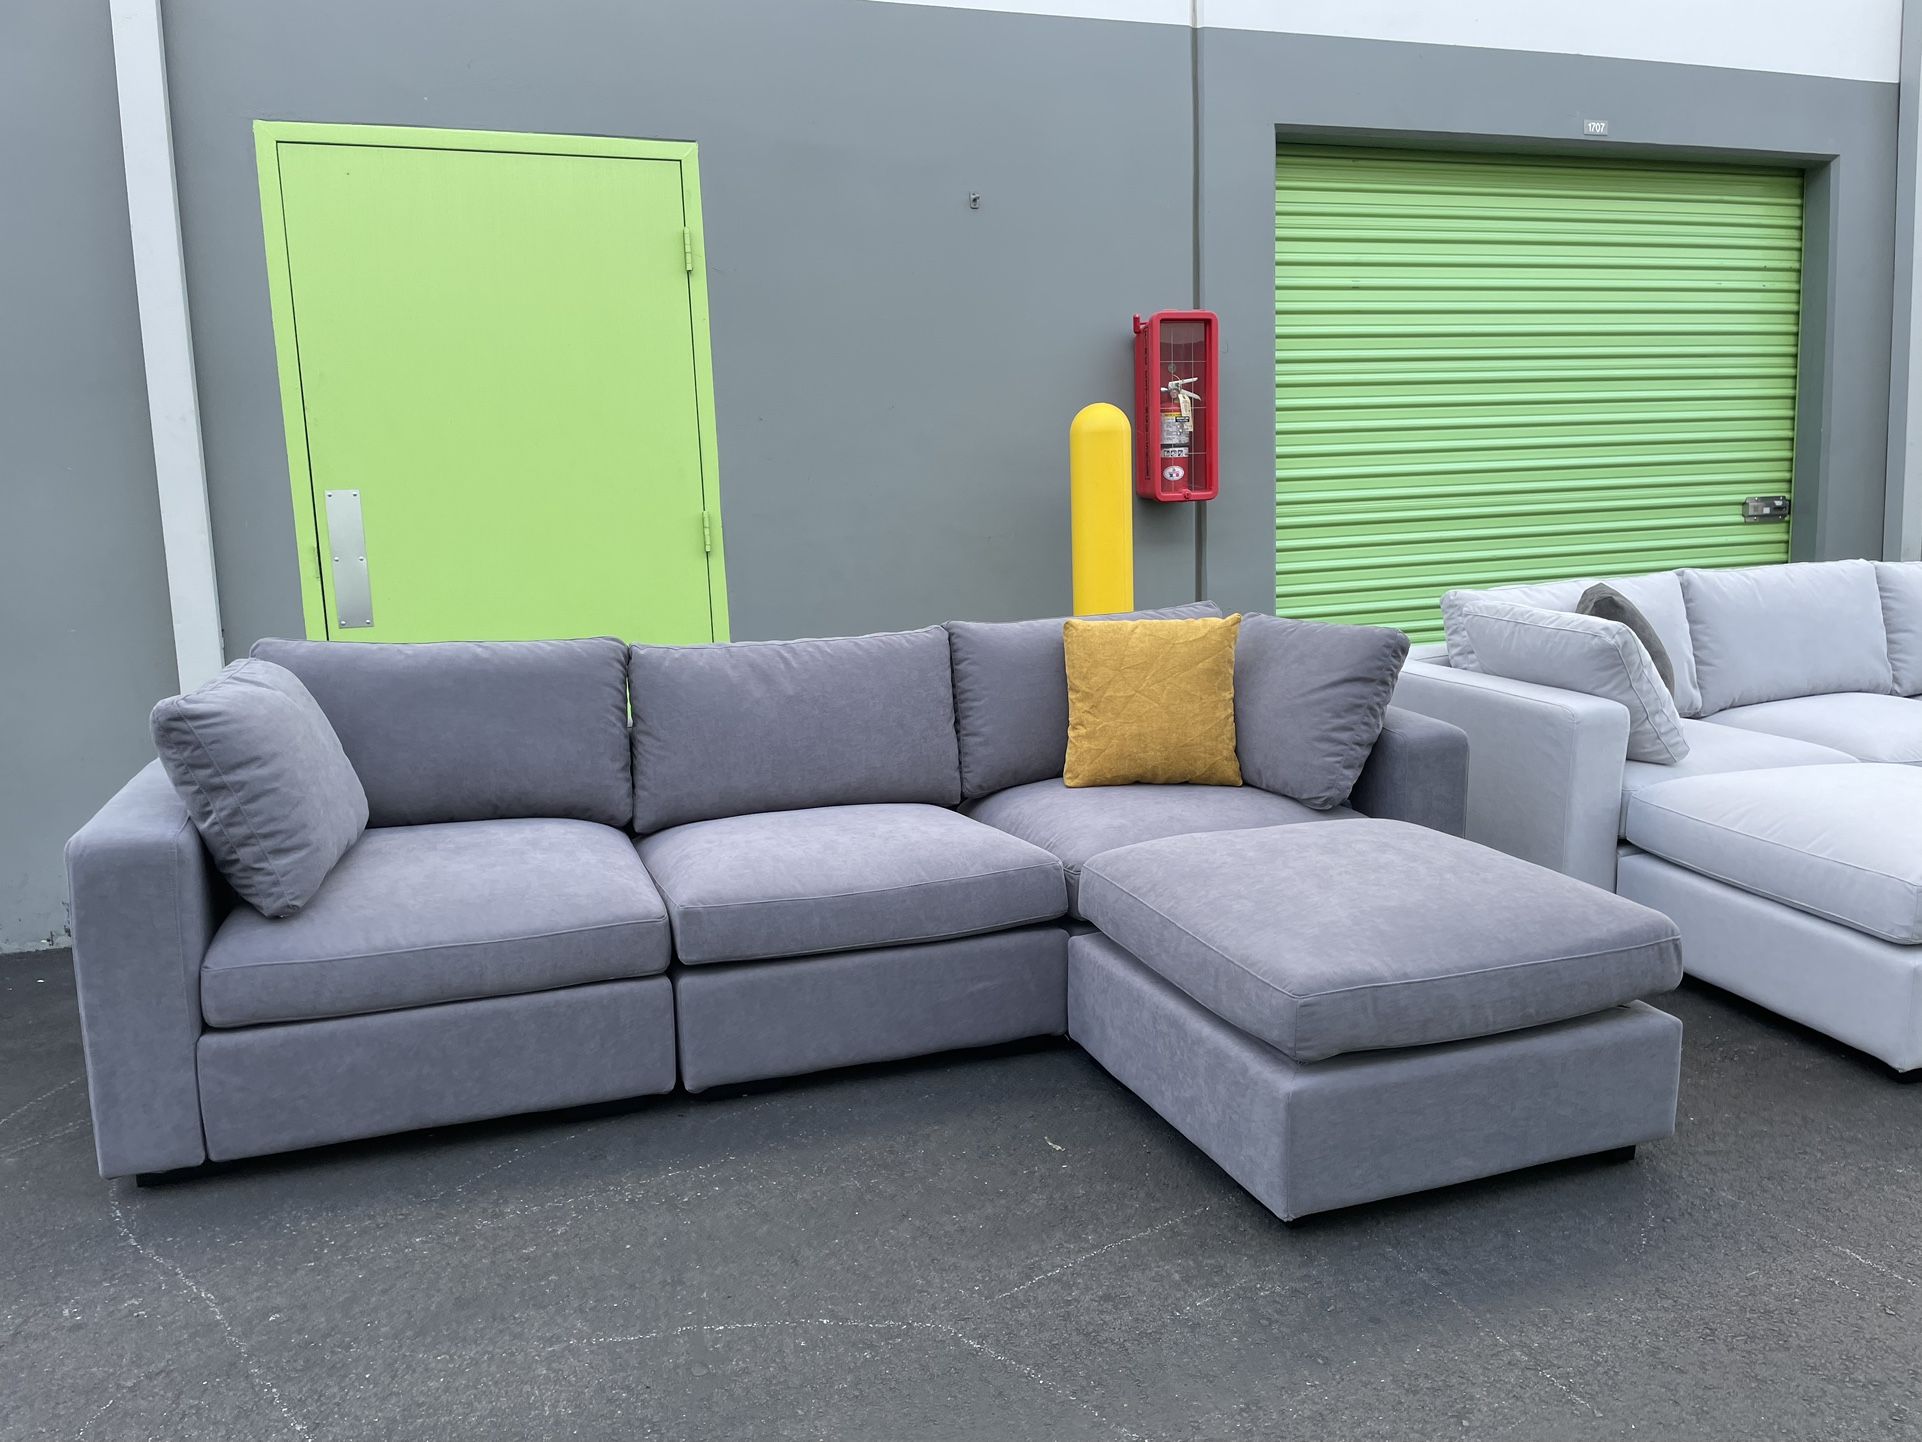 (NEW IN BOX!) Dark Grey Cloud Sectional Couch